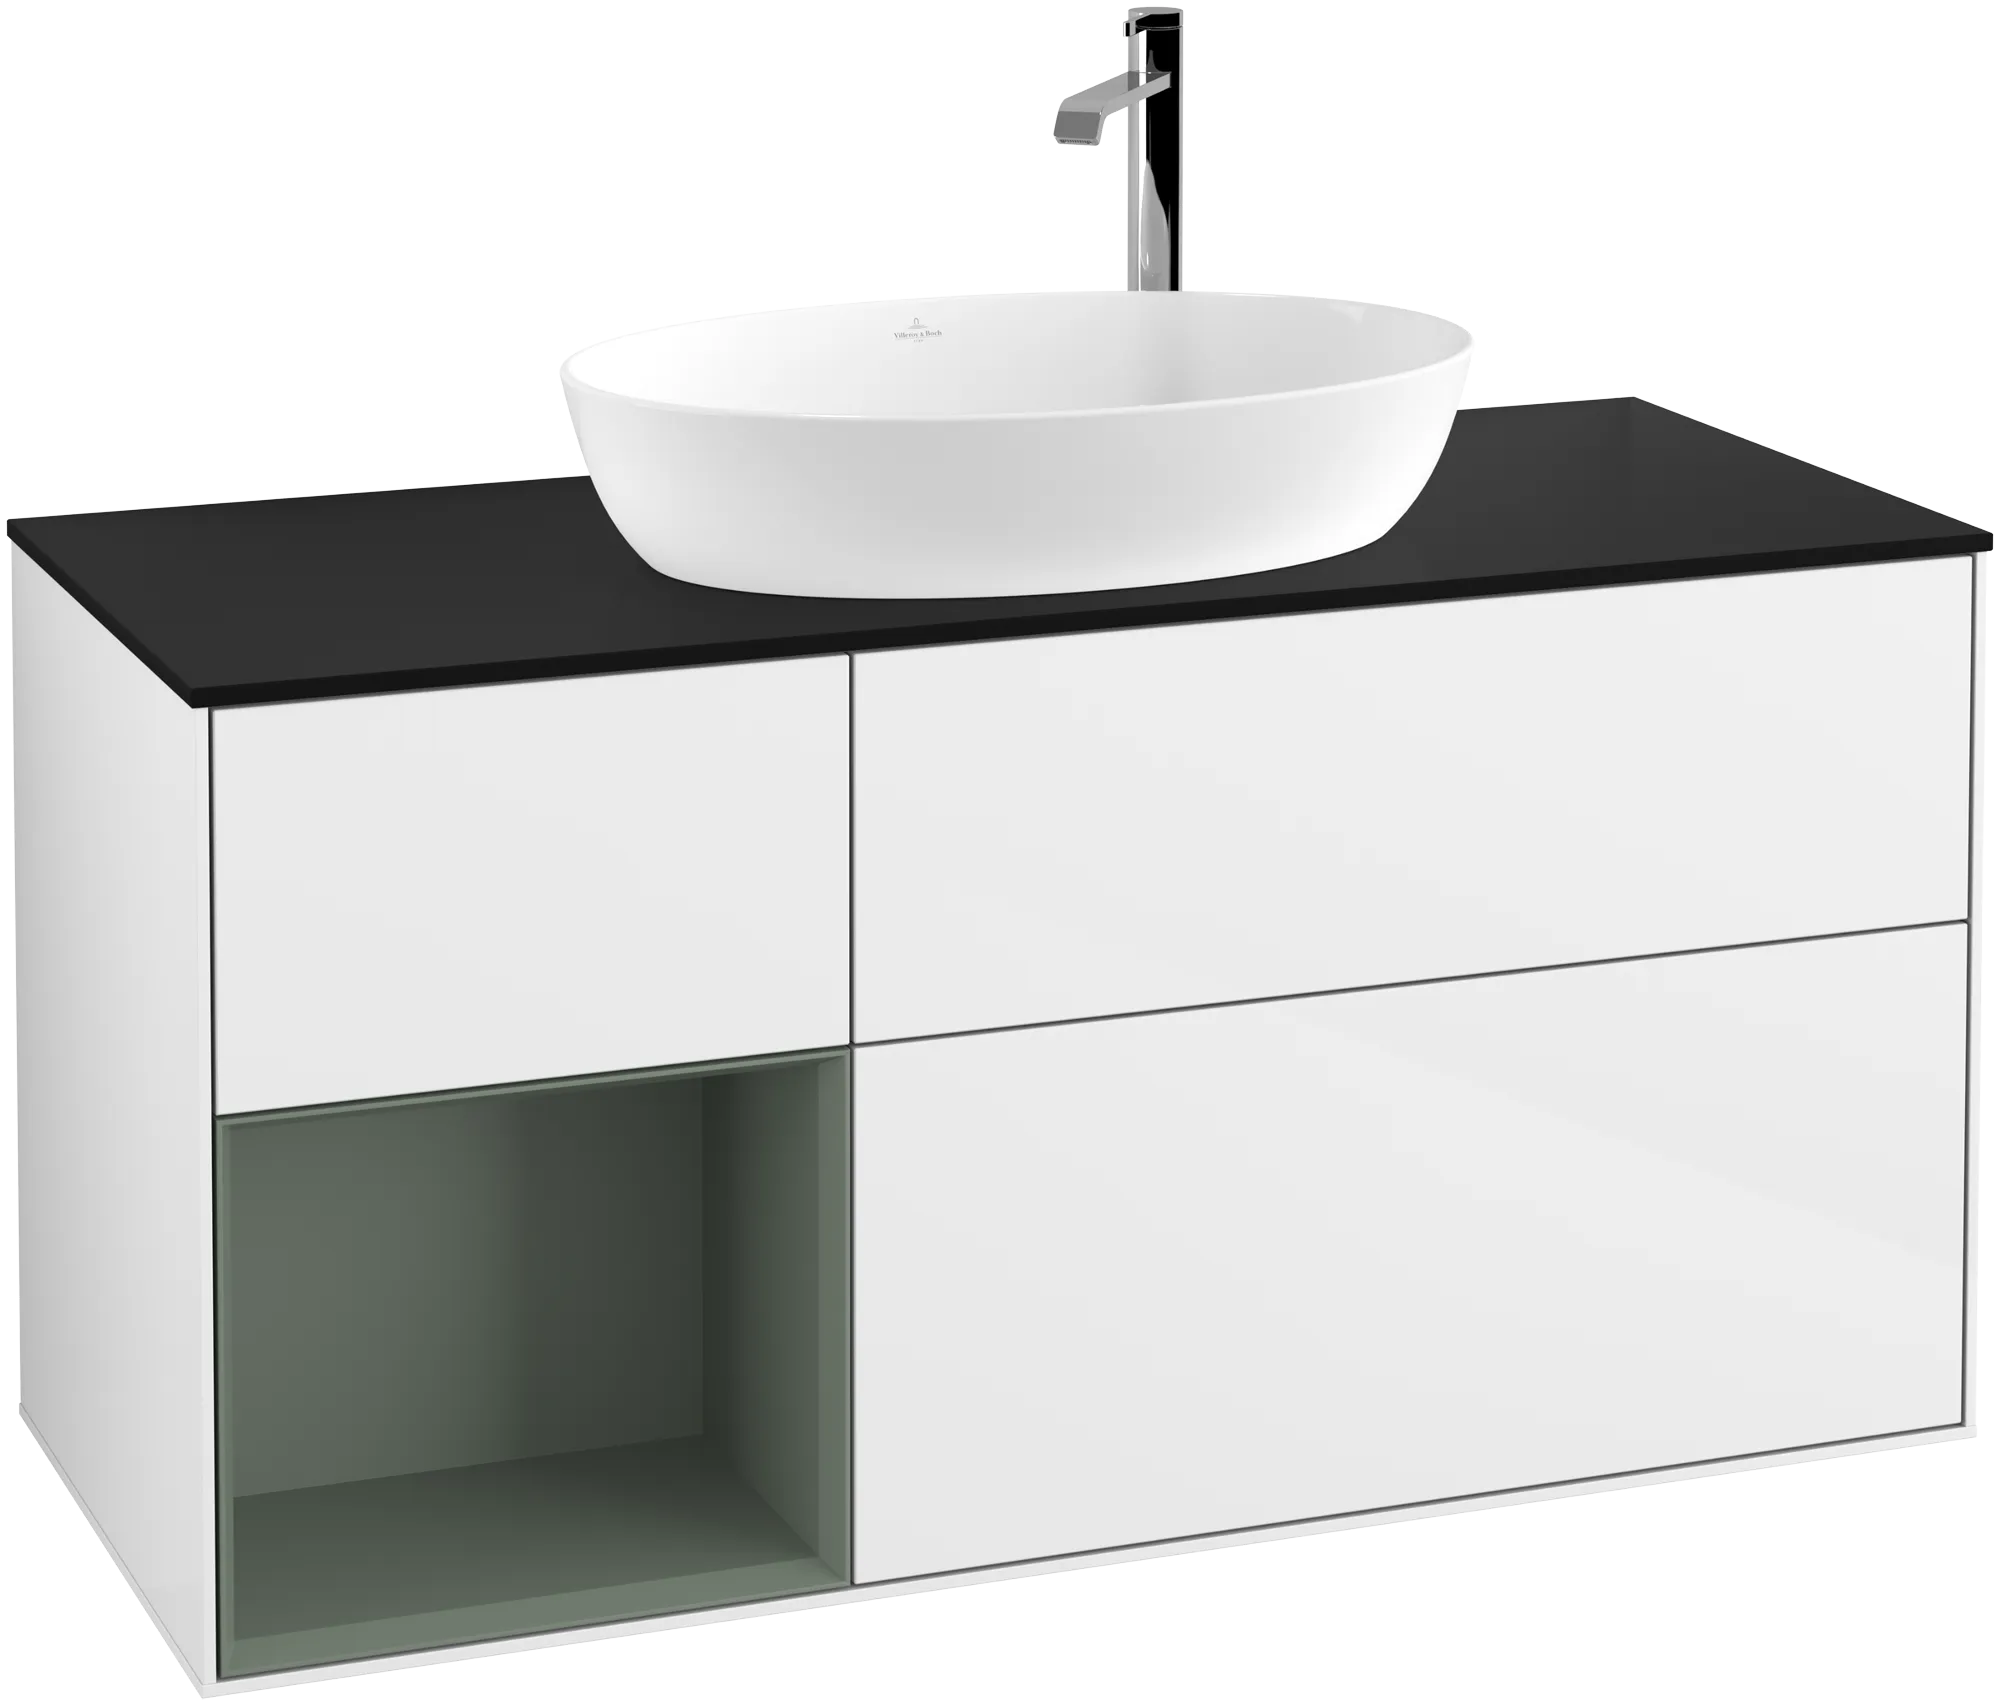 Obrázek VILLEROY BOCH Finion Vanity unit, with lighting, 3 pull-out compartments, 1200 x 603 x 501 mm, Glossy White Lacquer / Olive Matt Lacquer / Glass Black Matt #G942GMGF